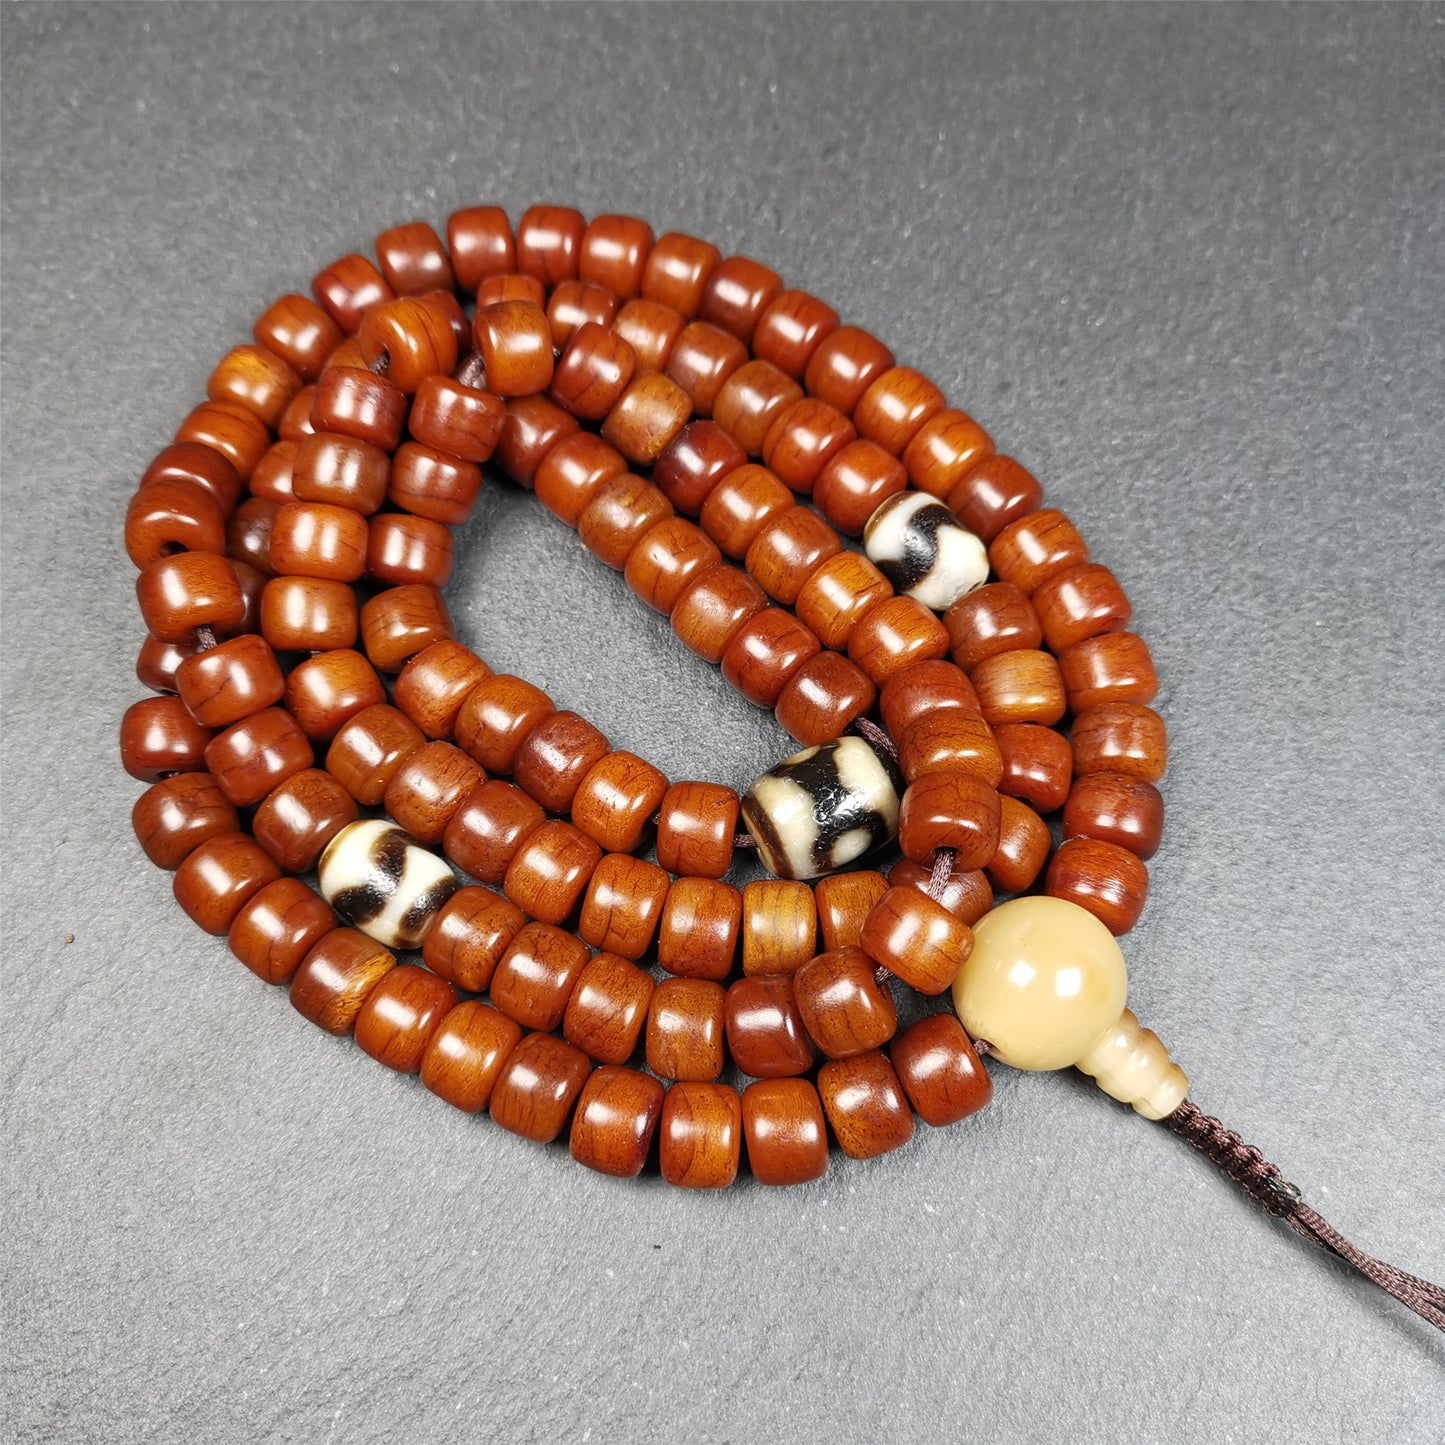 This mala was made by Tibetan craftsmen and come from Hepo Town.  It is made of yak bone, brown color,108 dice beads diameter of 10mm,0.4",circumference is 84cm,33",and 3 dzi beads,end of a yak horn guru bead.